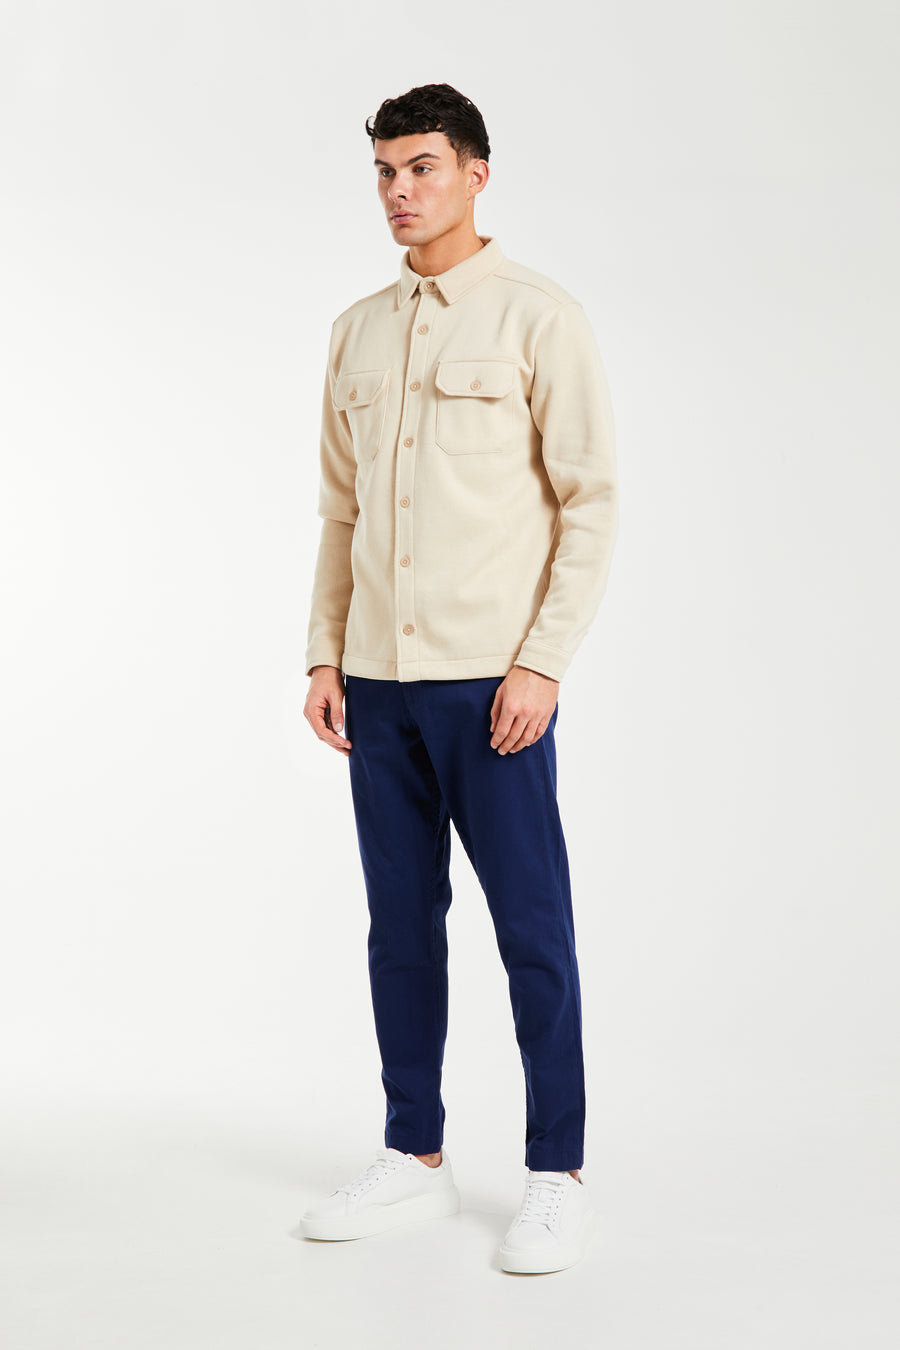 model wearing full outfit with men's chinos sale in royal blue